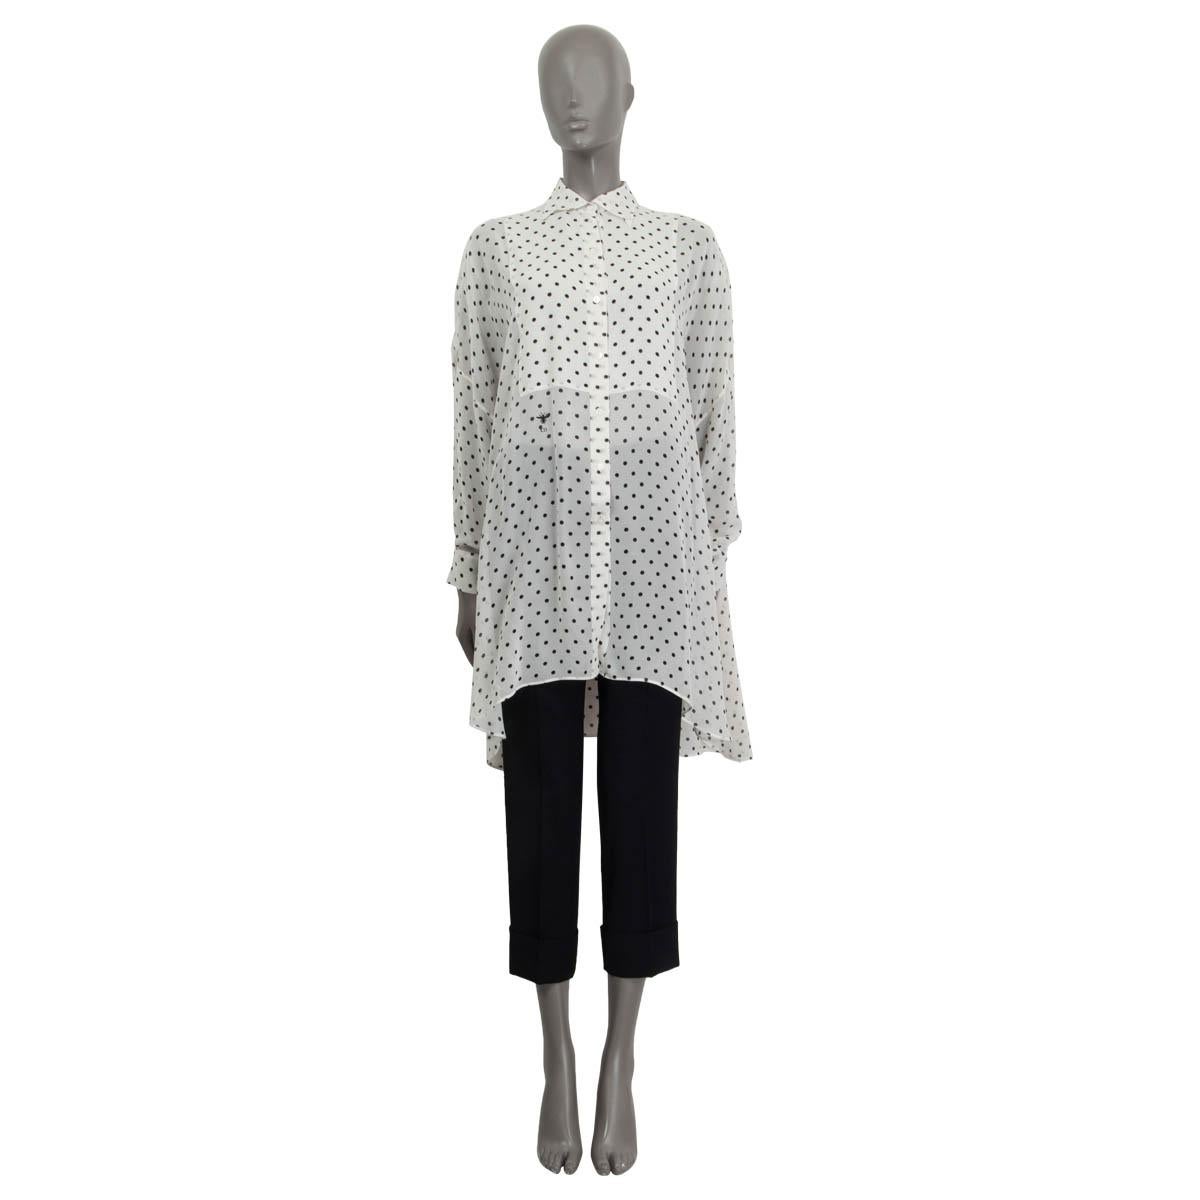 100% authentic Christian Dior sheer polka dot tunic shirt in white and black silk (assumed because tag is missing). Features batwings and an oversized fit. Has long sleeves and the 'CD' logo on the front. Opens with seven buttons on the front.